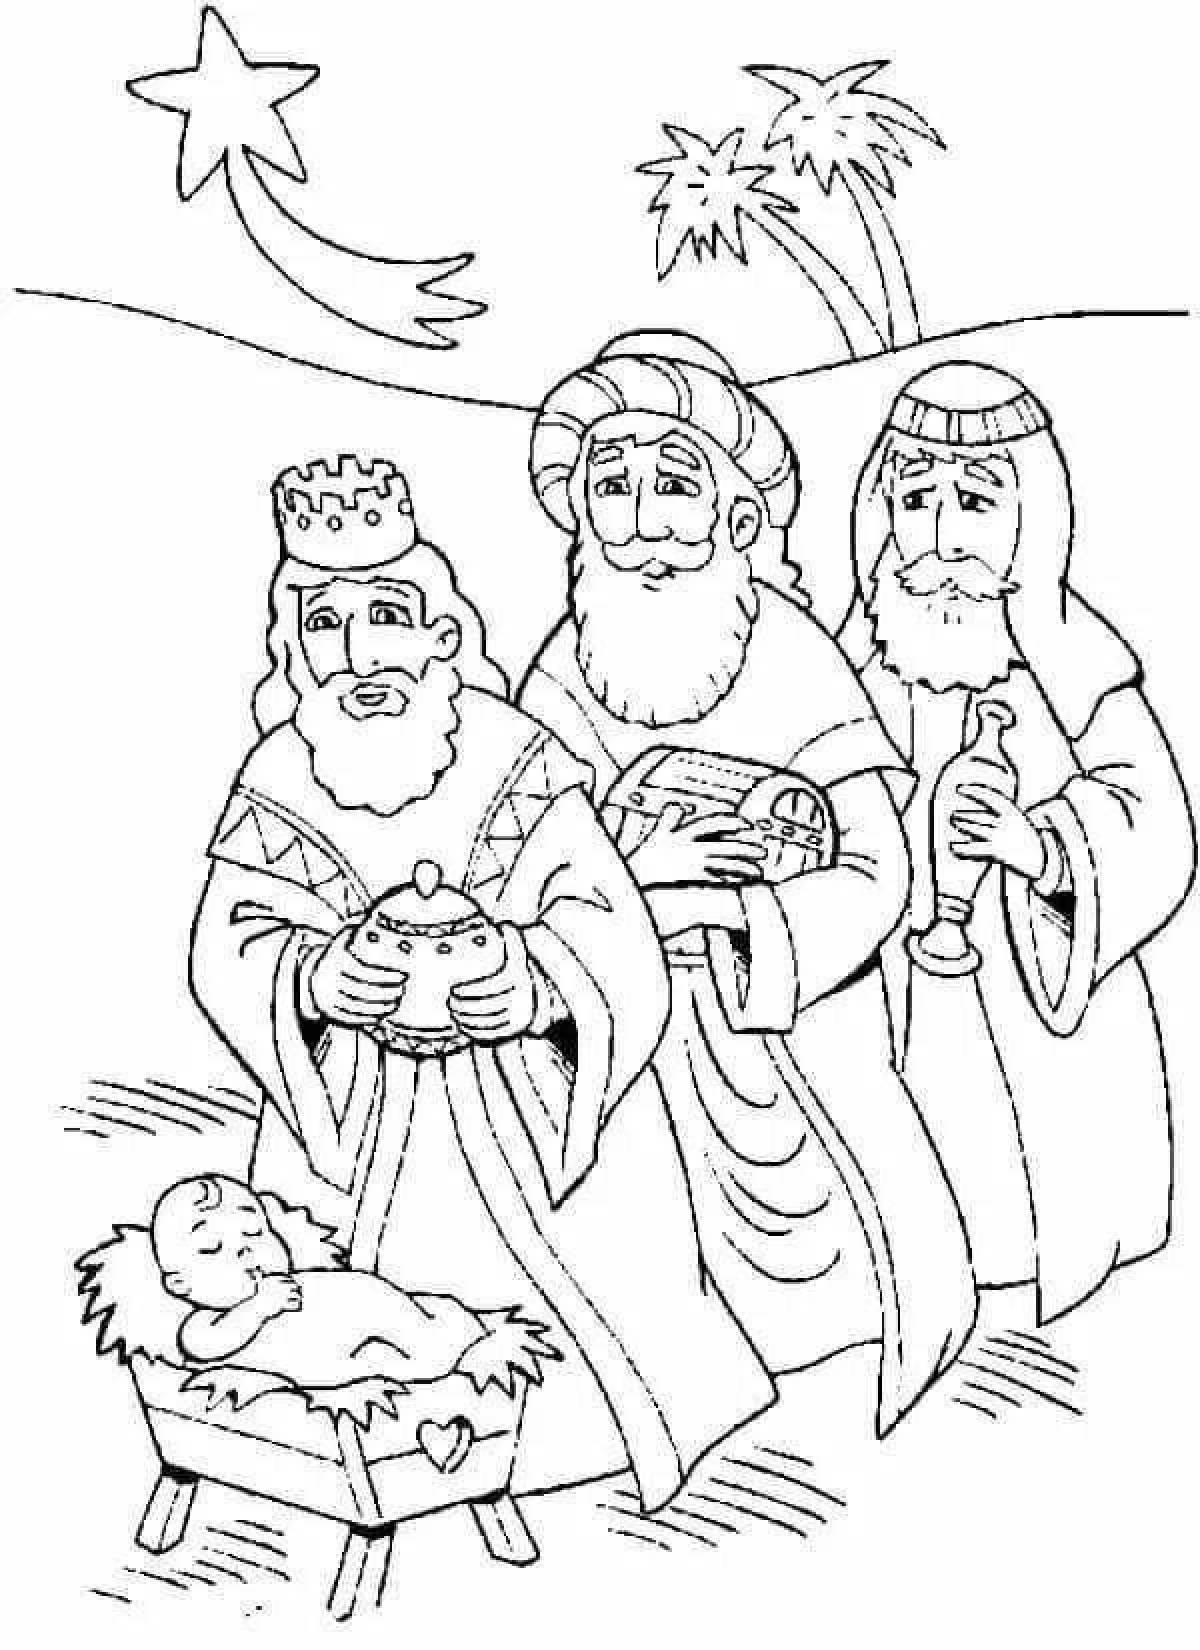 Merry Christmas coloring for kids Orthodoxy